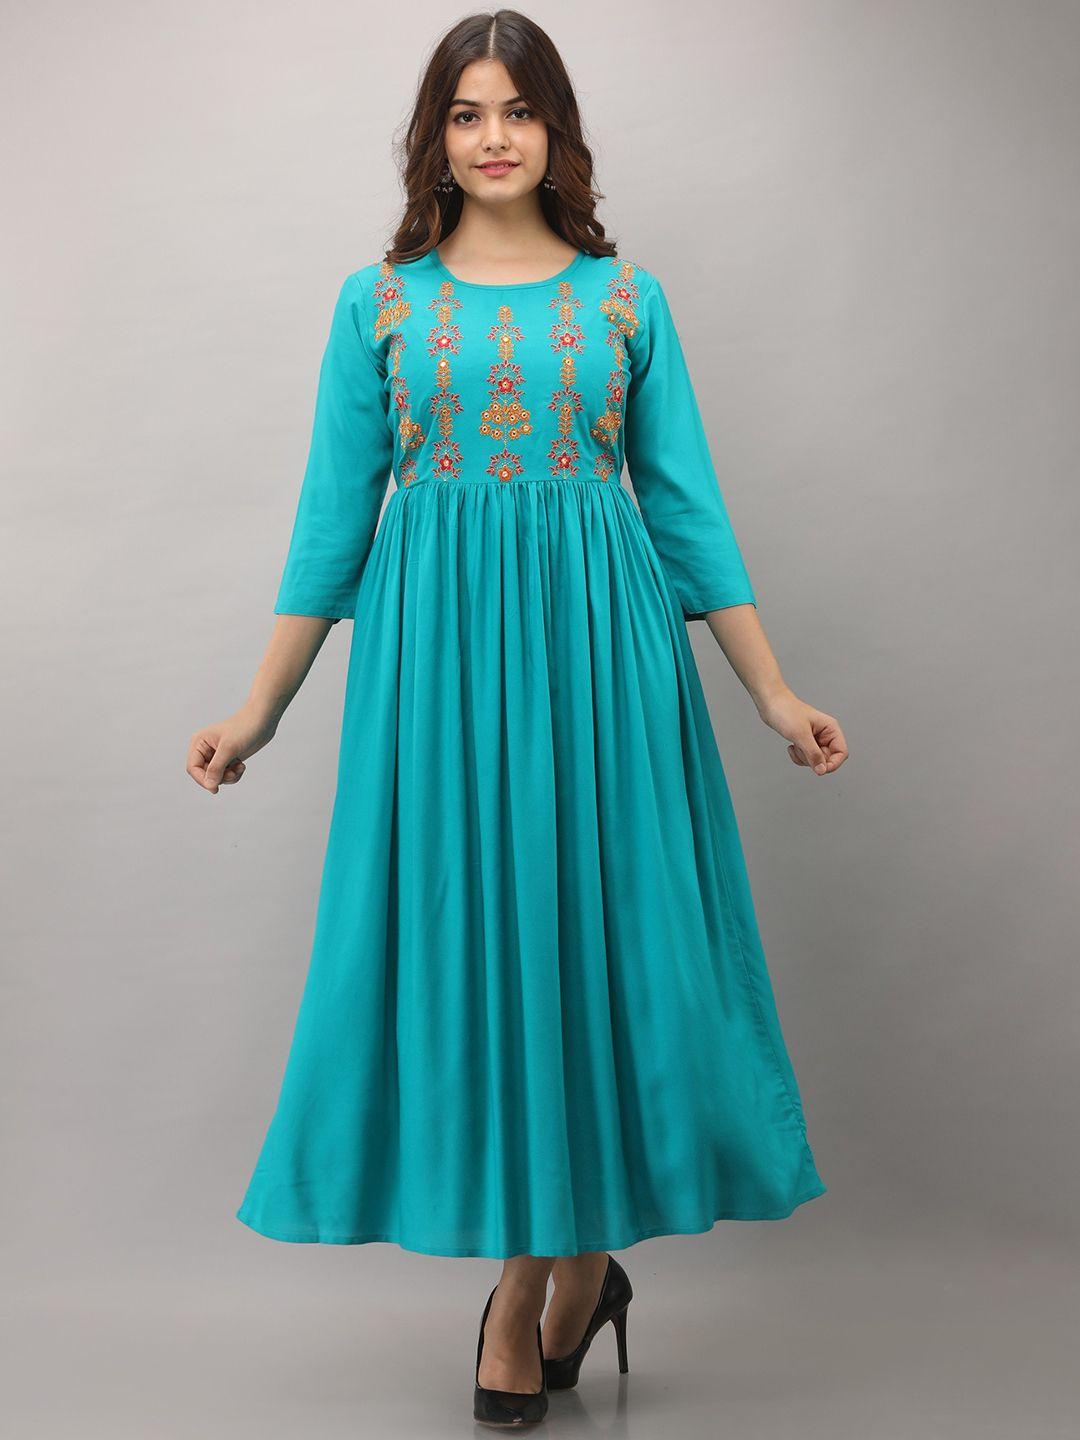 women touch turquoise blue solid embroided ethnic midi dress